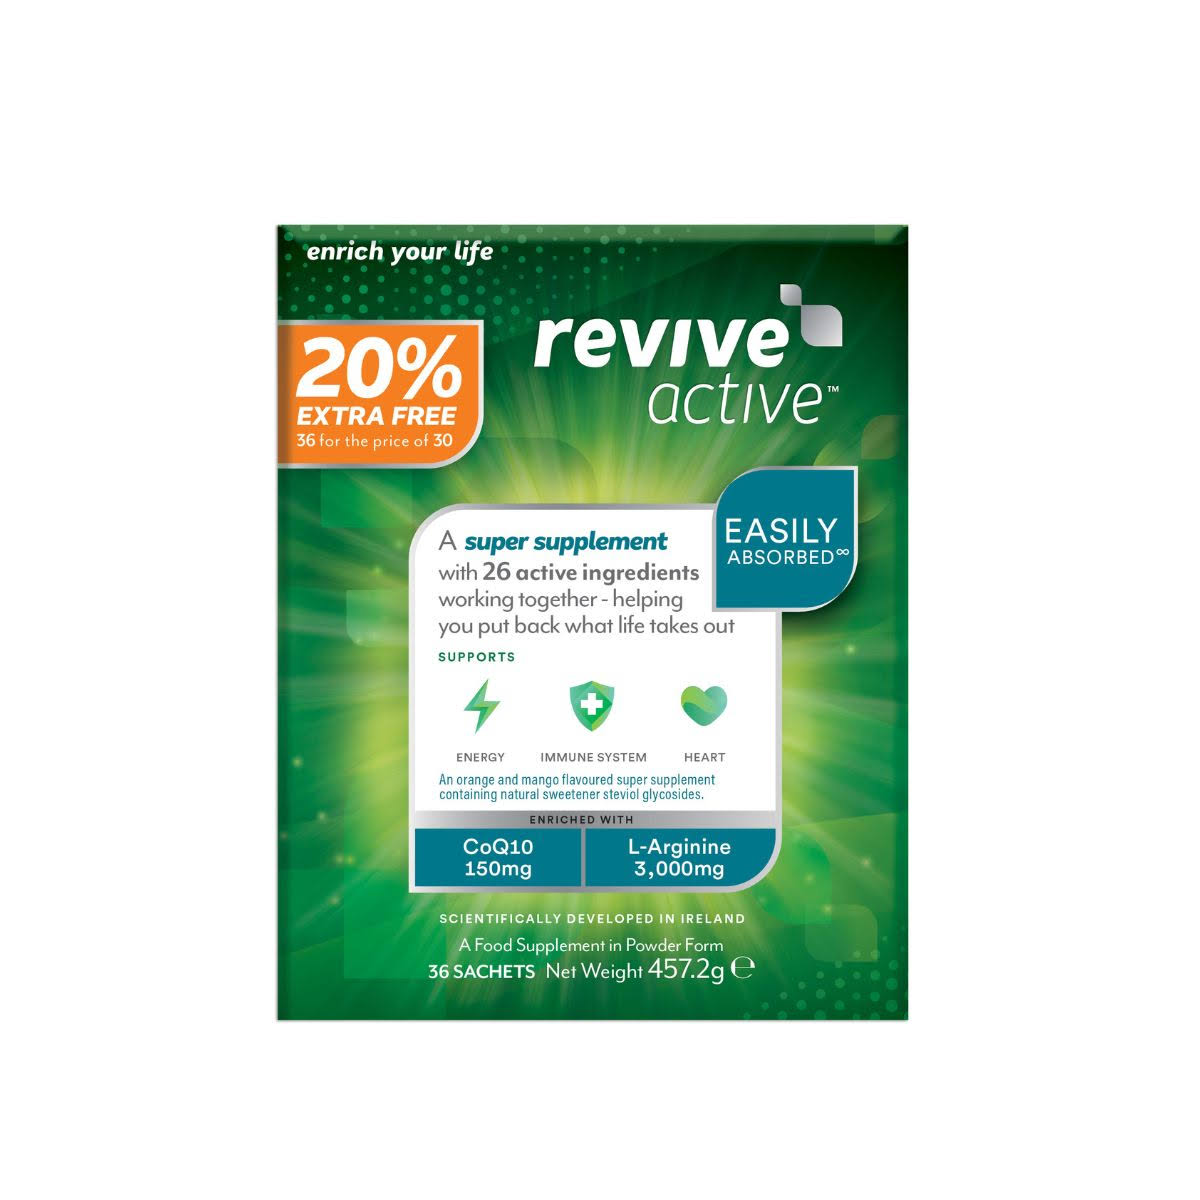 Revive Active - 30 Sachets + 20% Extra Free - Health Supplement